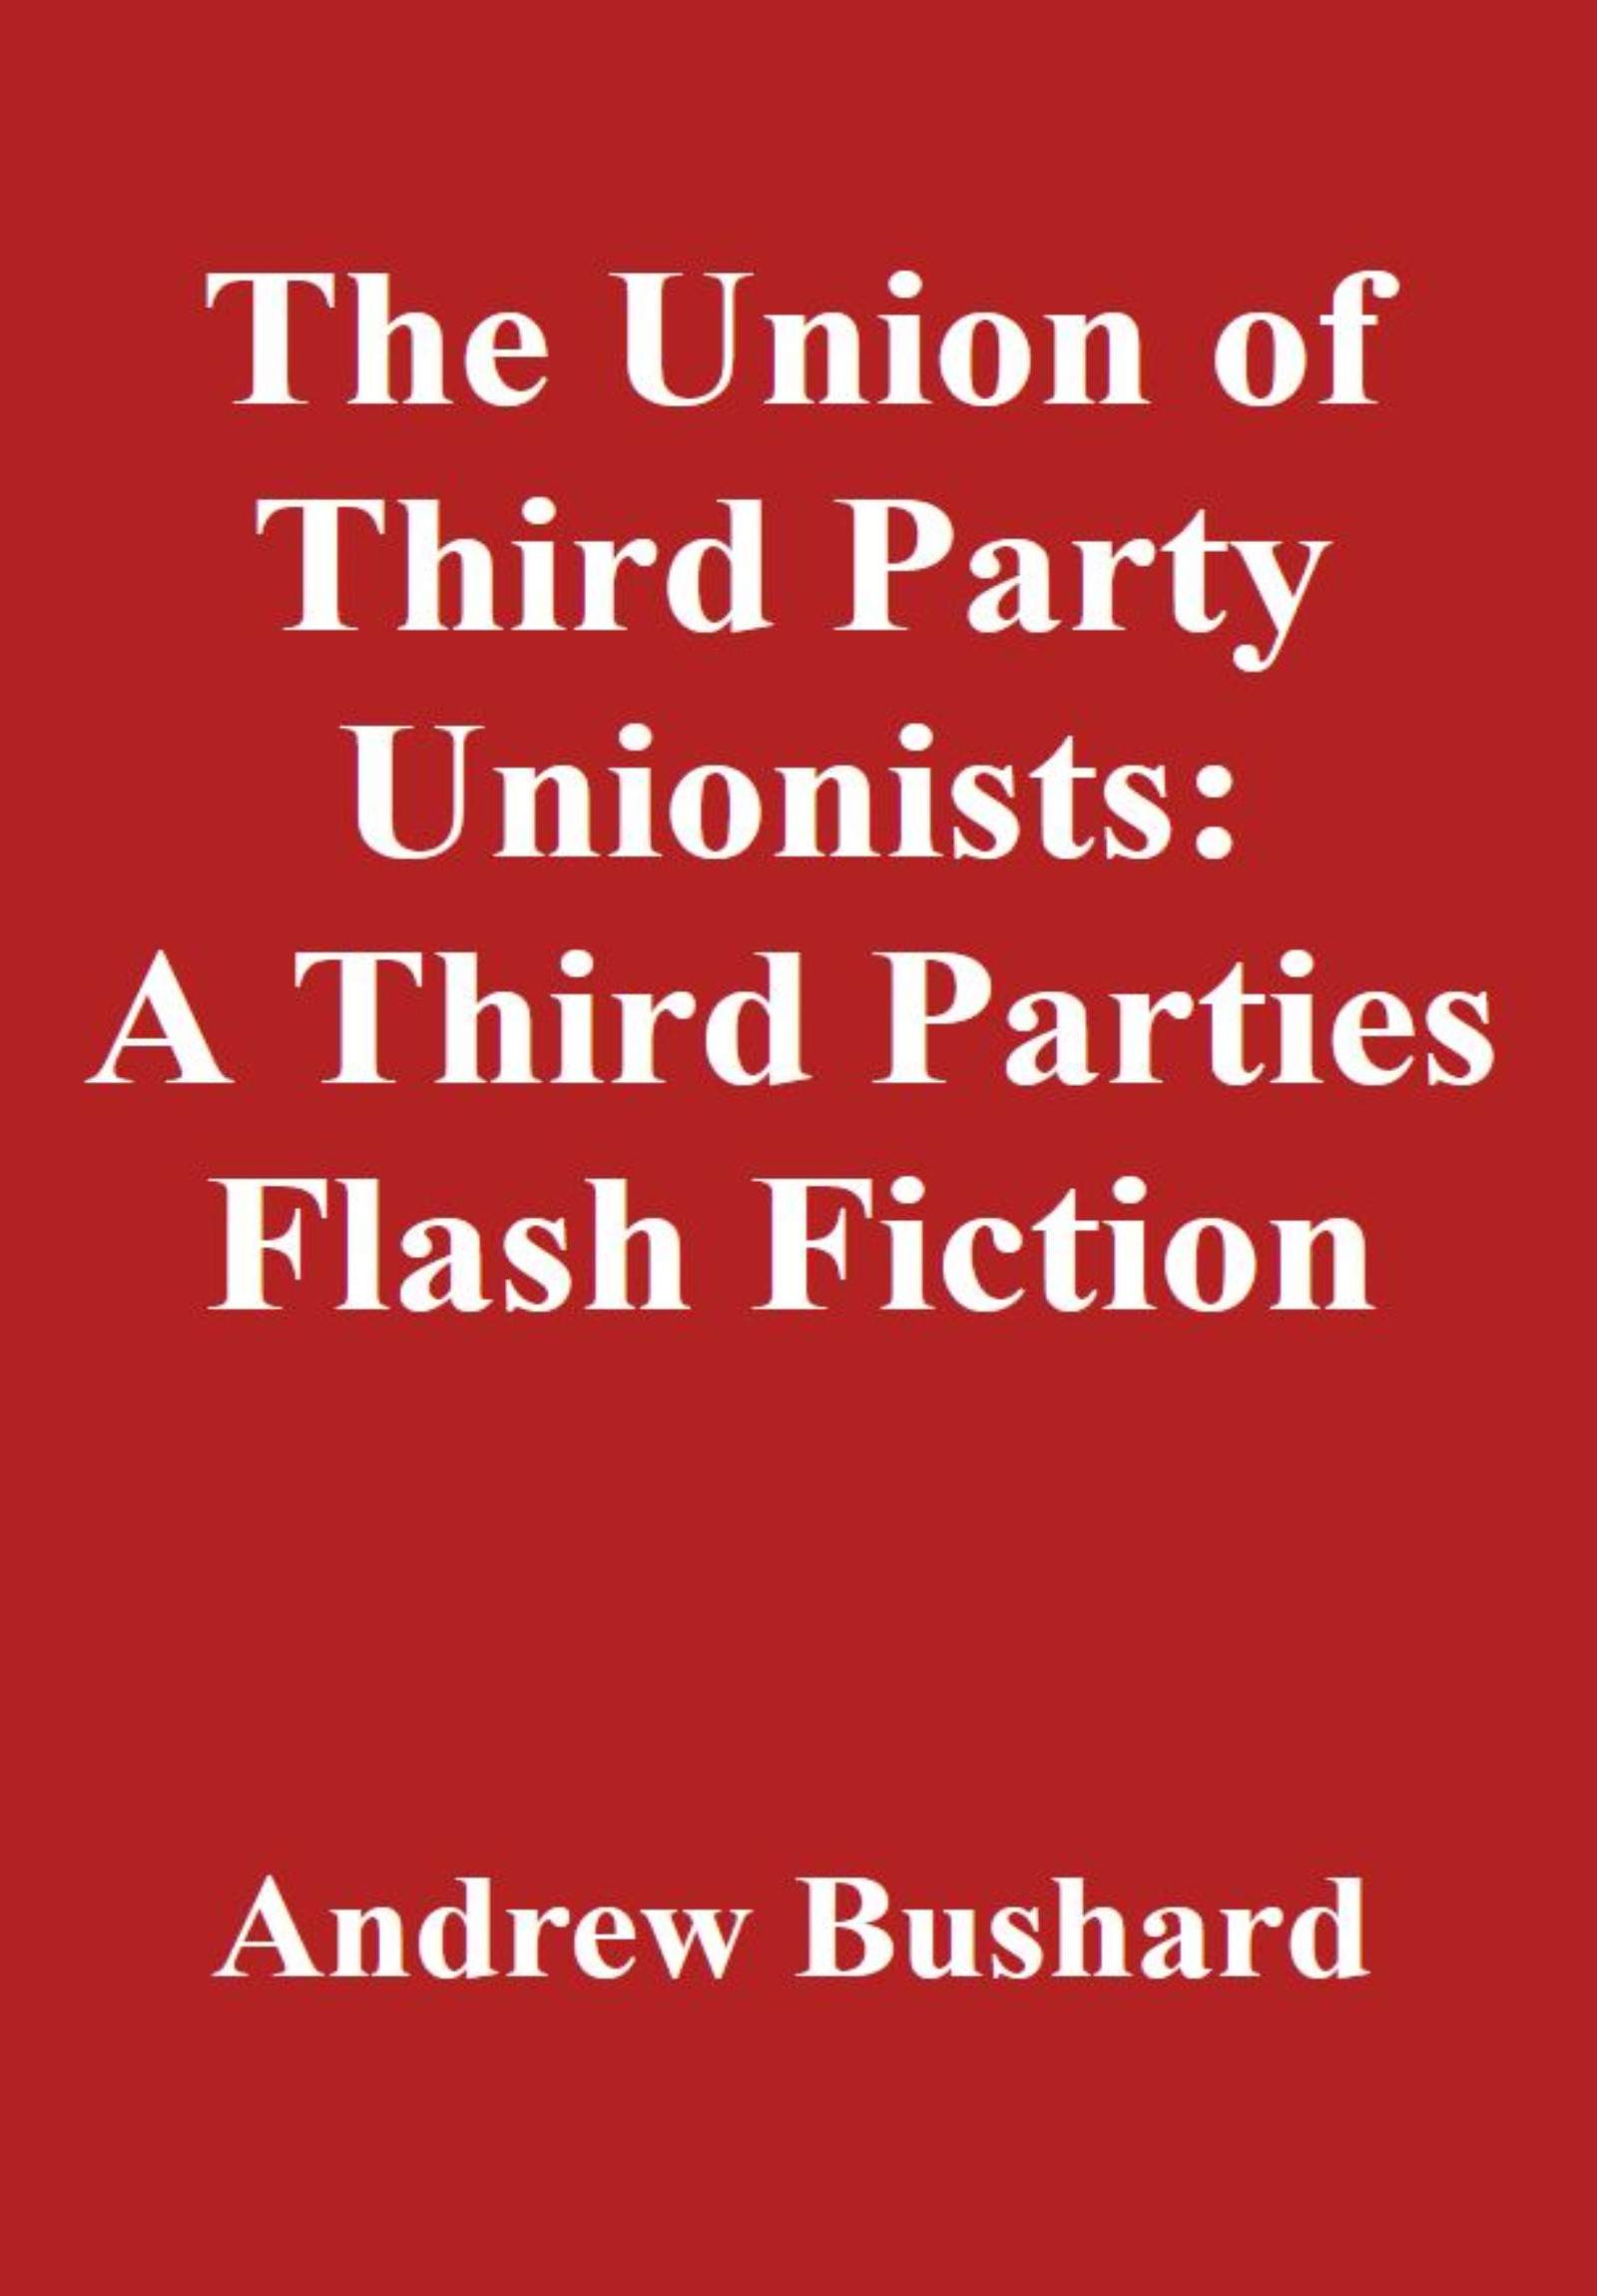 The Union of Third Party Unionists: A Third Parties Flash Fiction's featured image